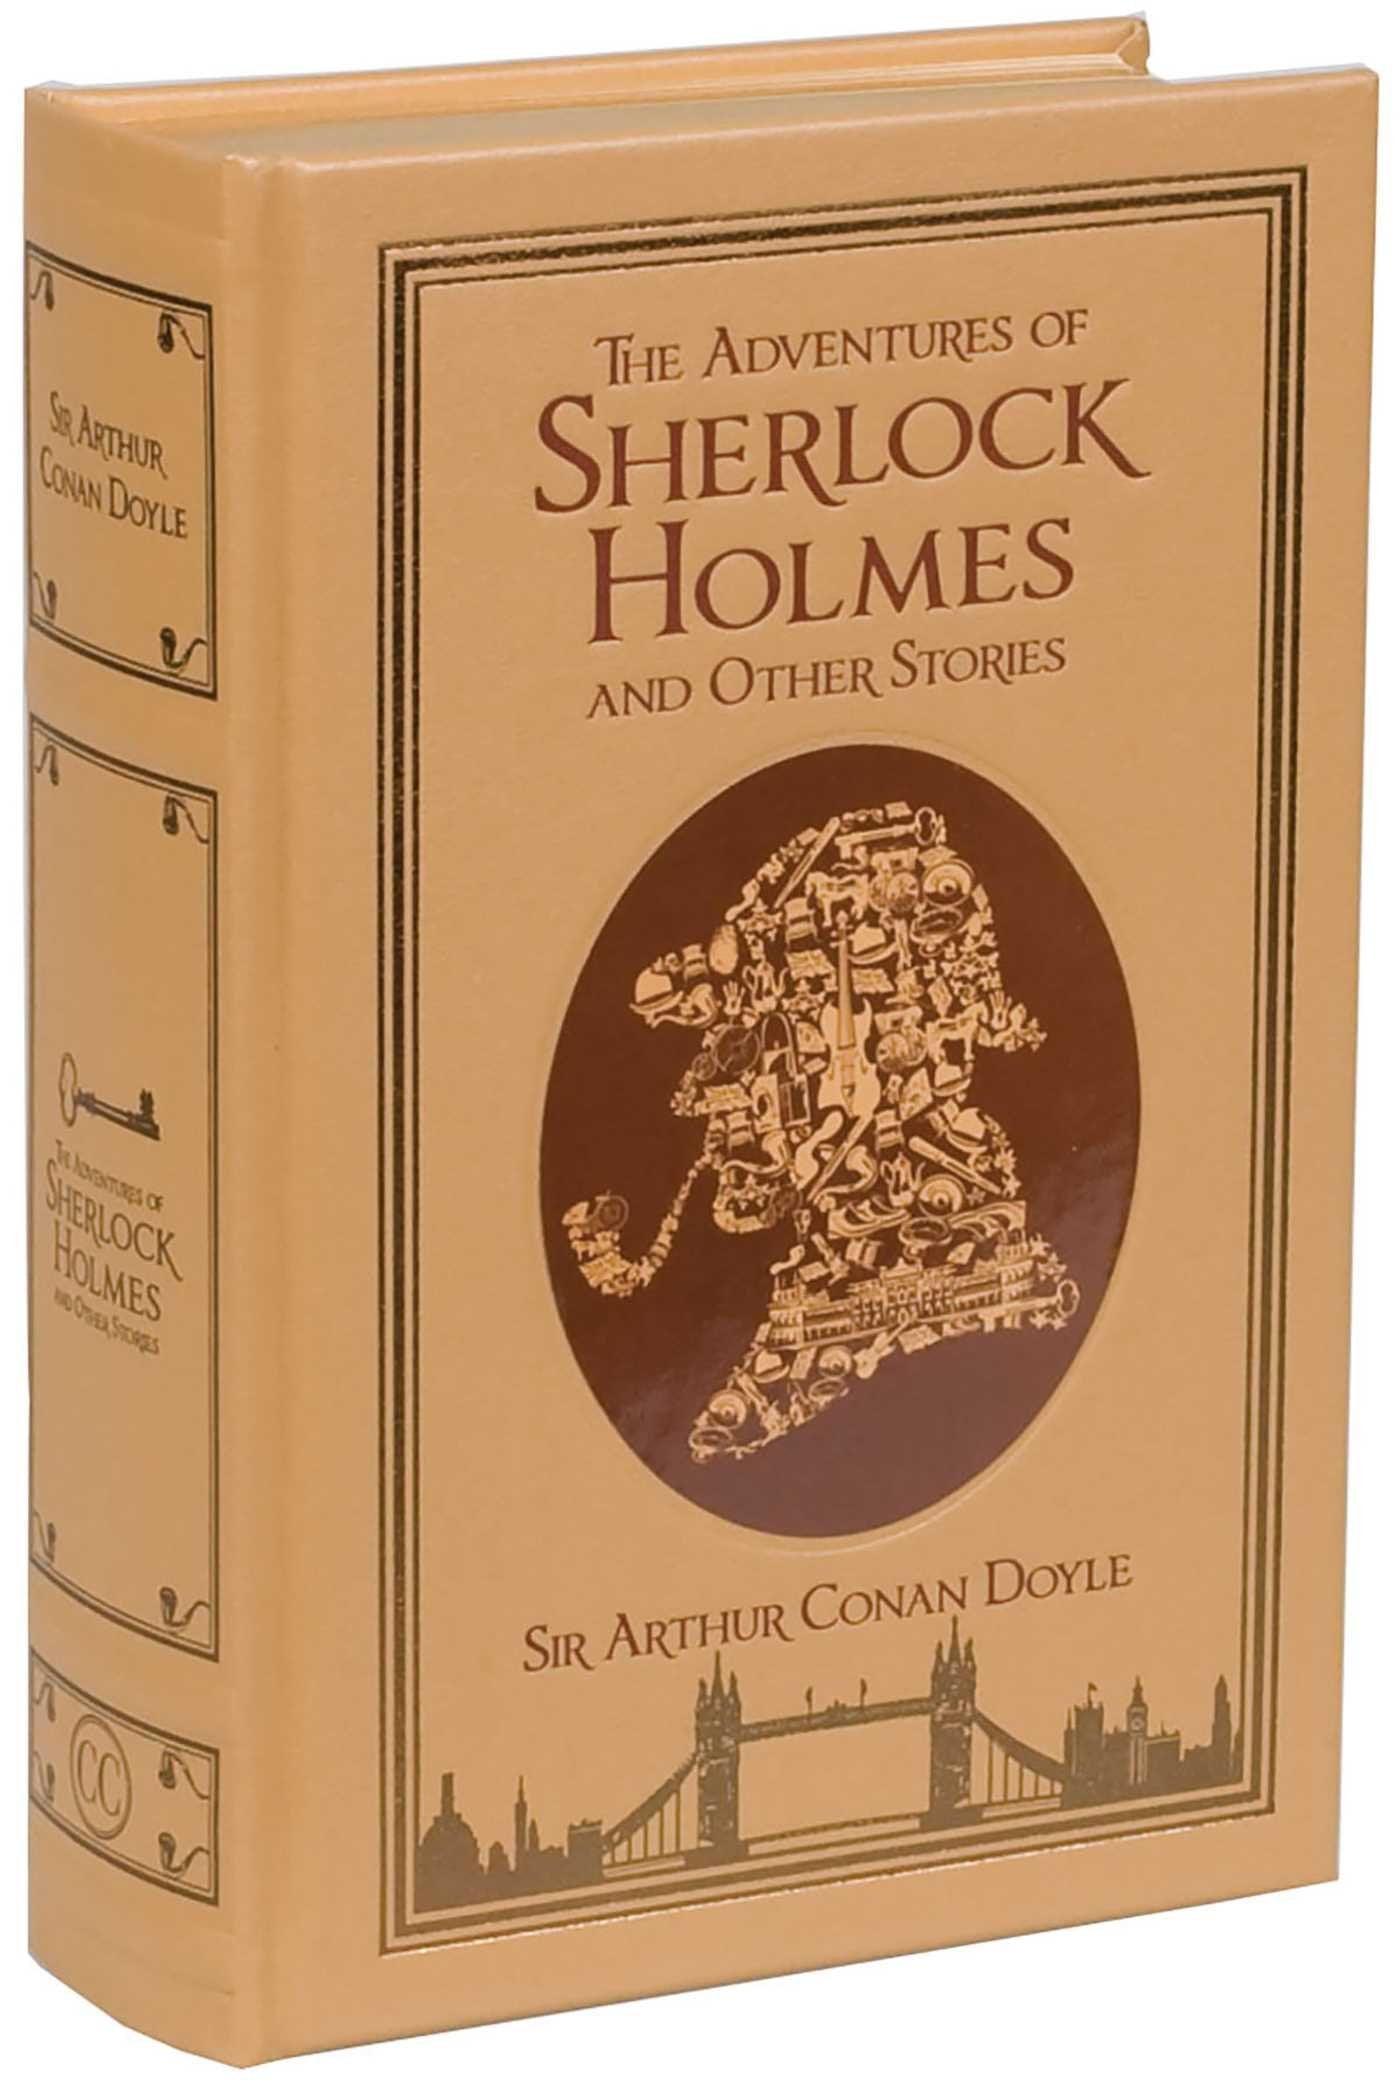 Adventures of Sherlock Holmes and Other Stories -- DragonSpace